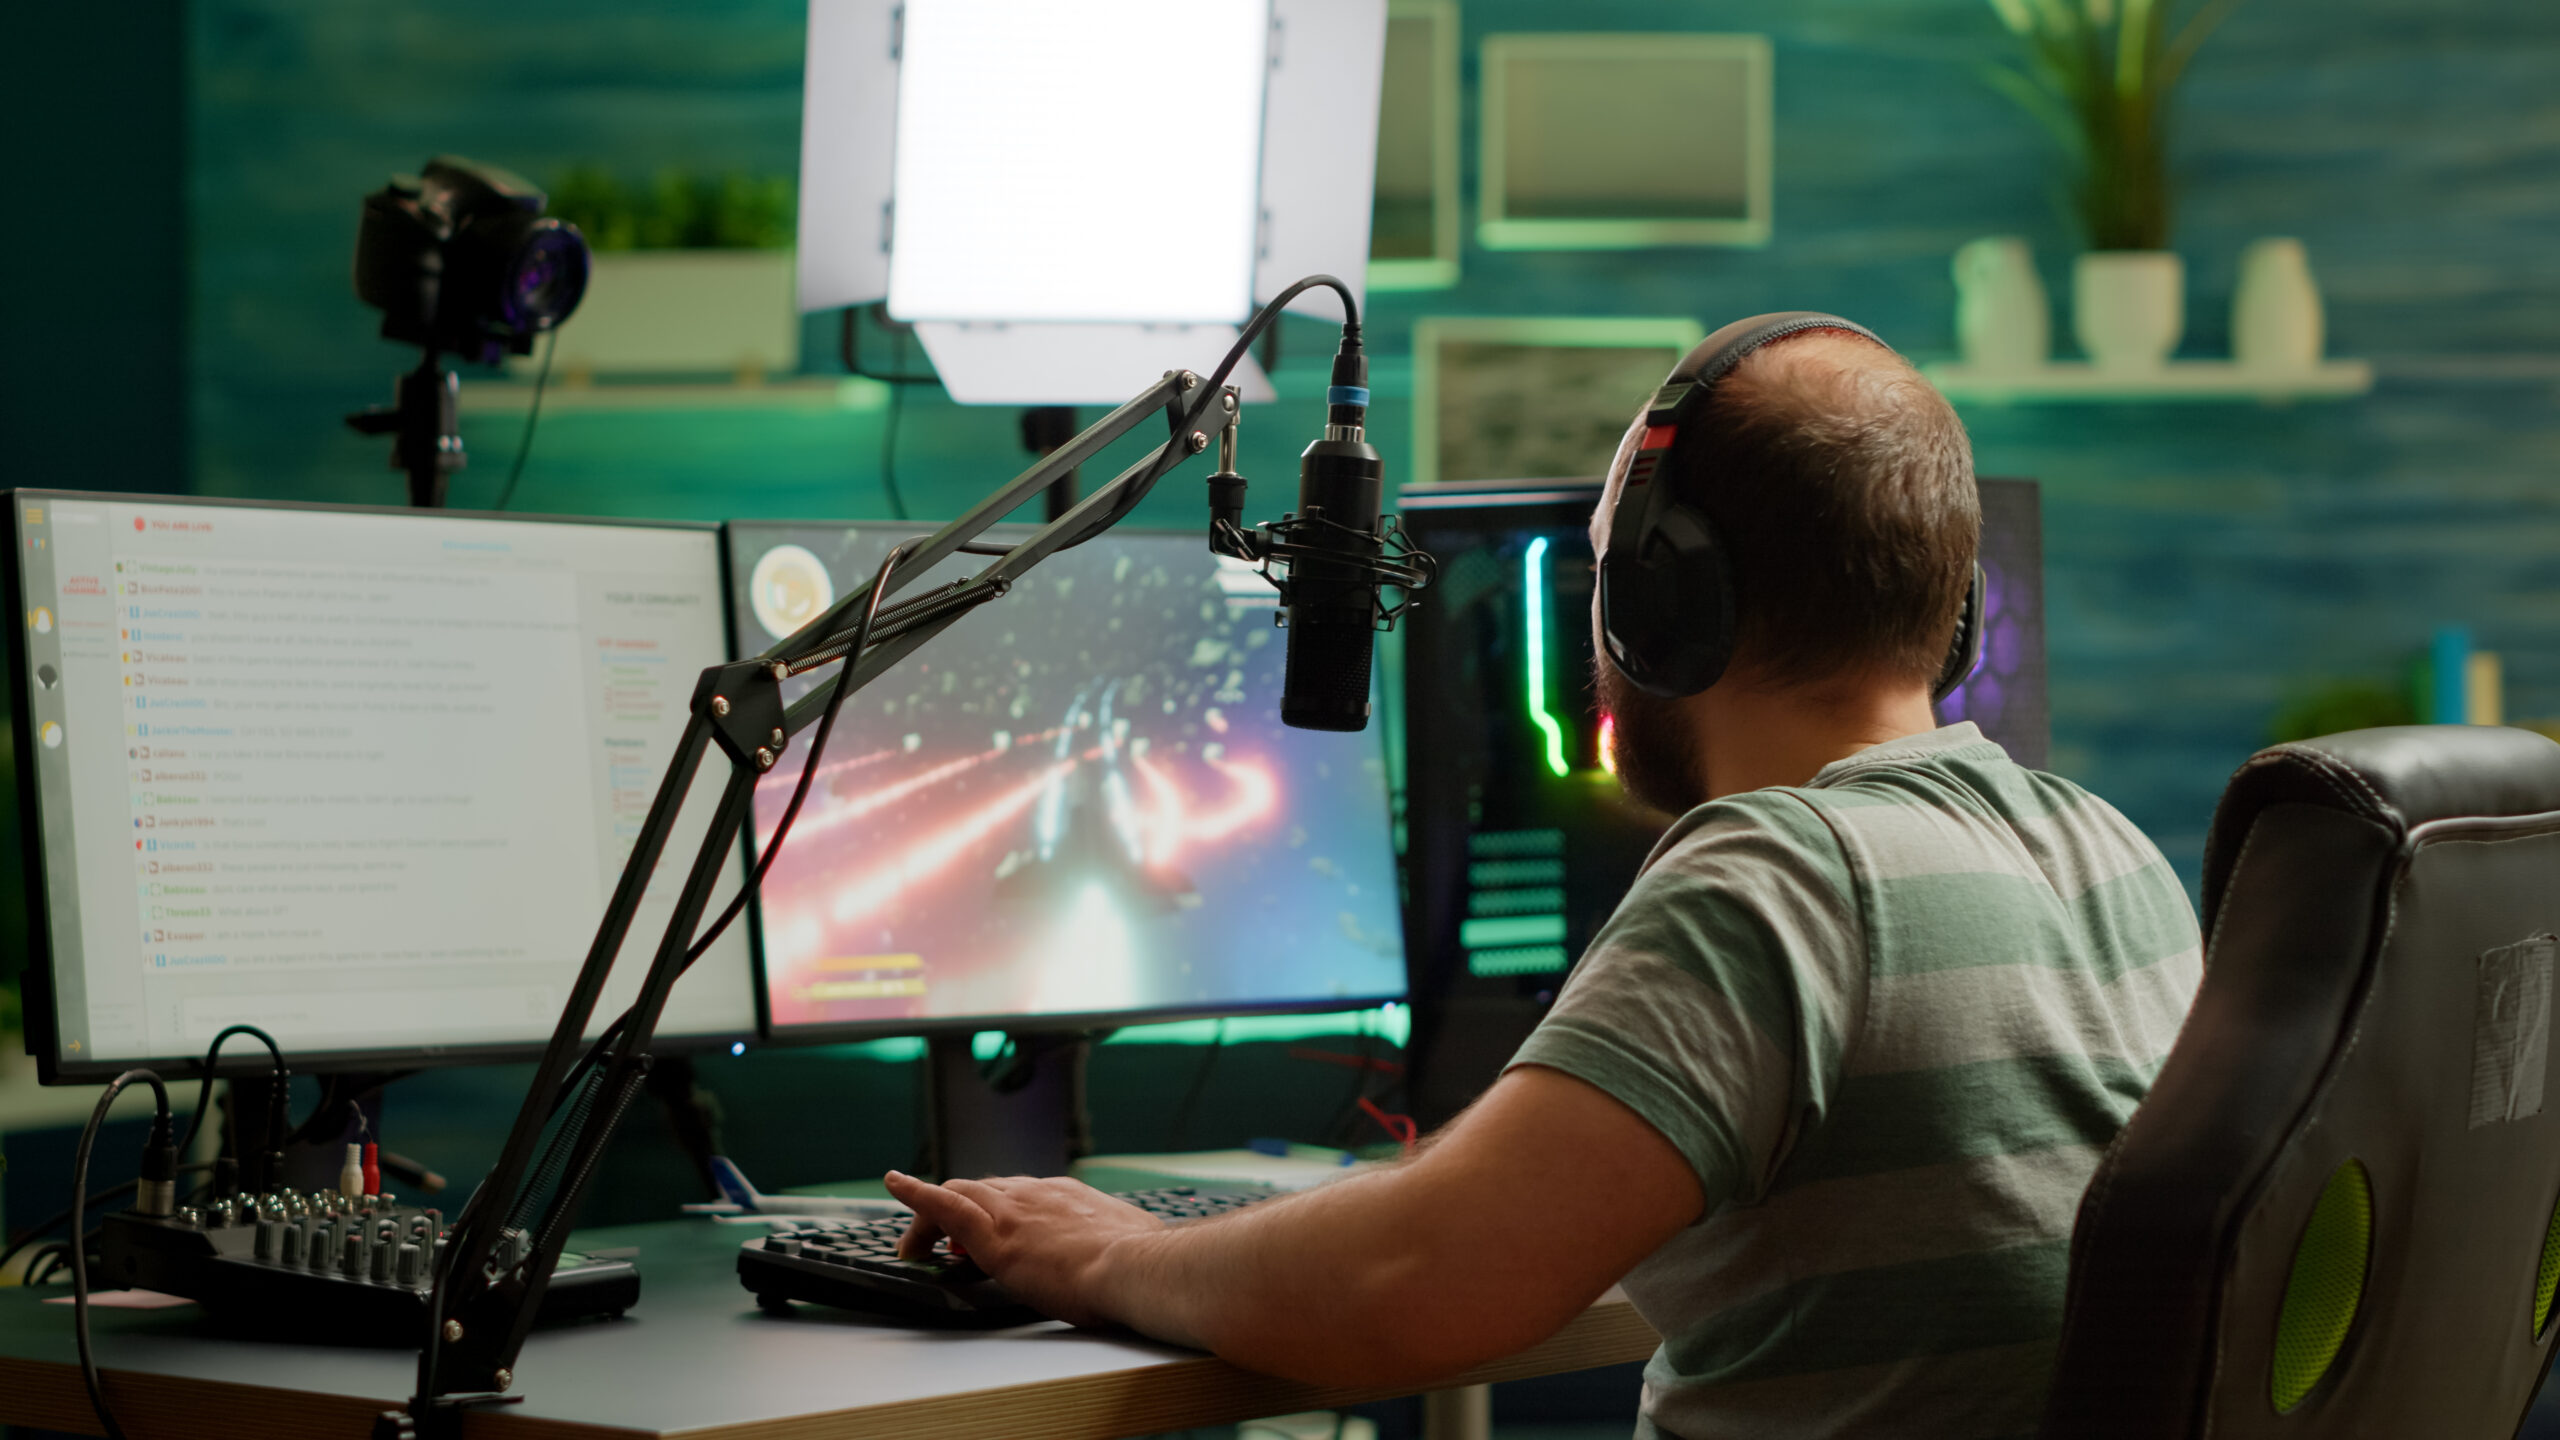 Man streamer playing space shooter videogame using headset, talking on stream chat and microphone. Online streaming cyber performing on RGB powerful professional computer during gaming tournament